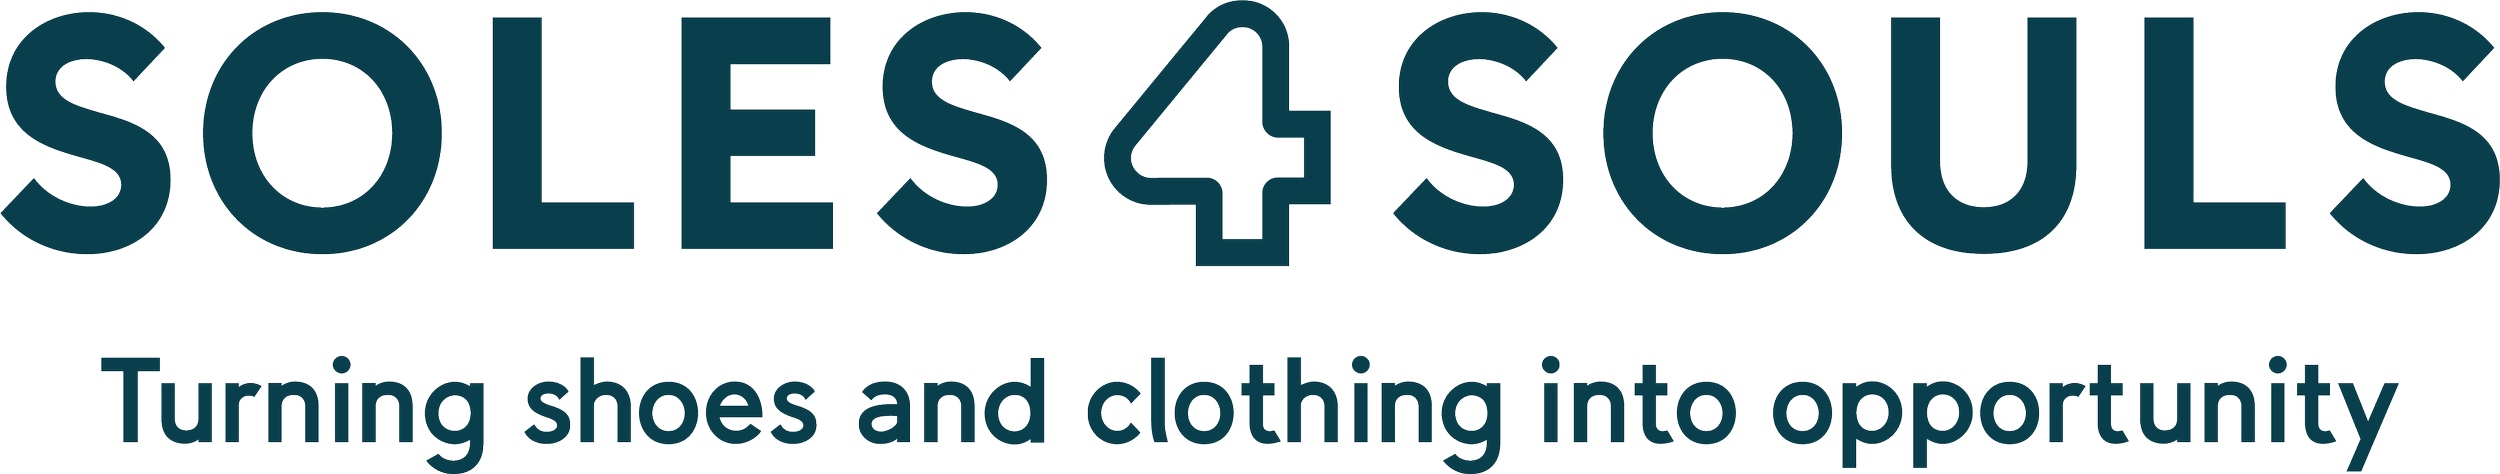 s4s-logo-color.png